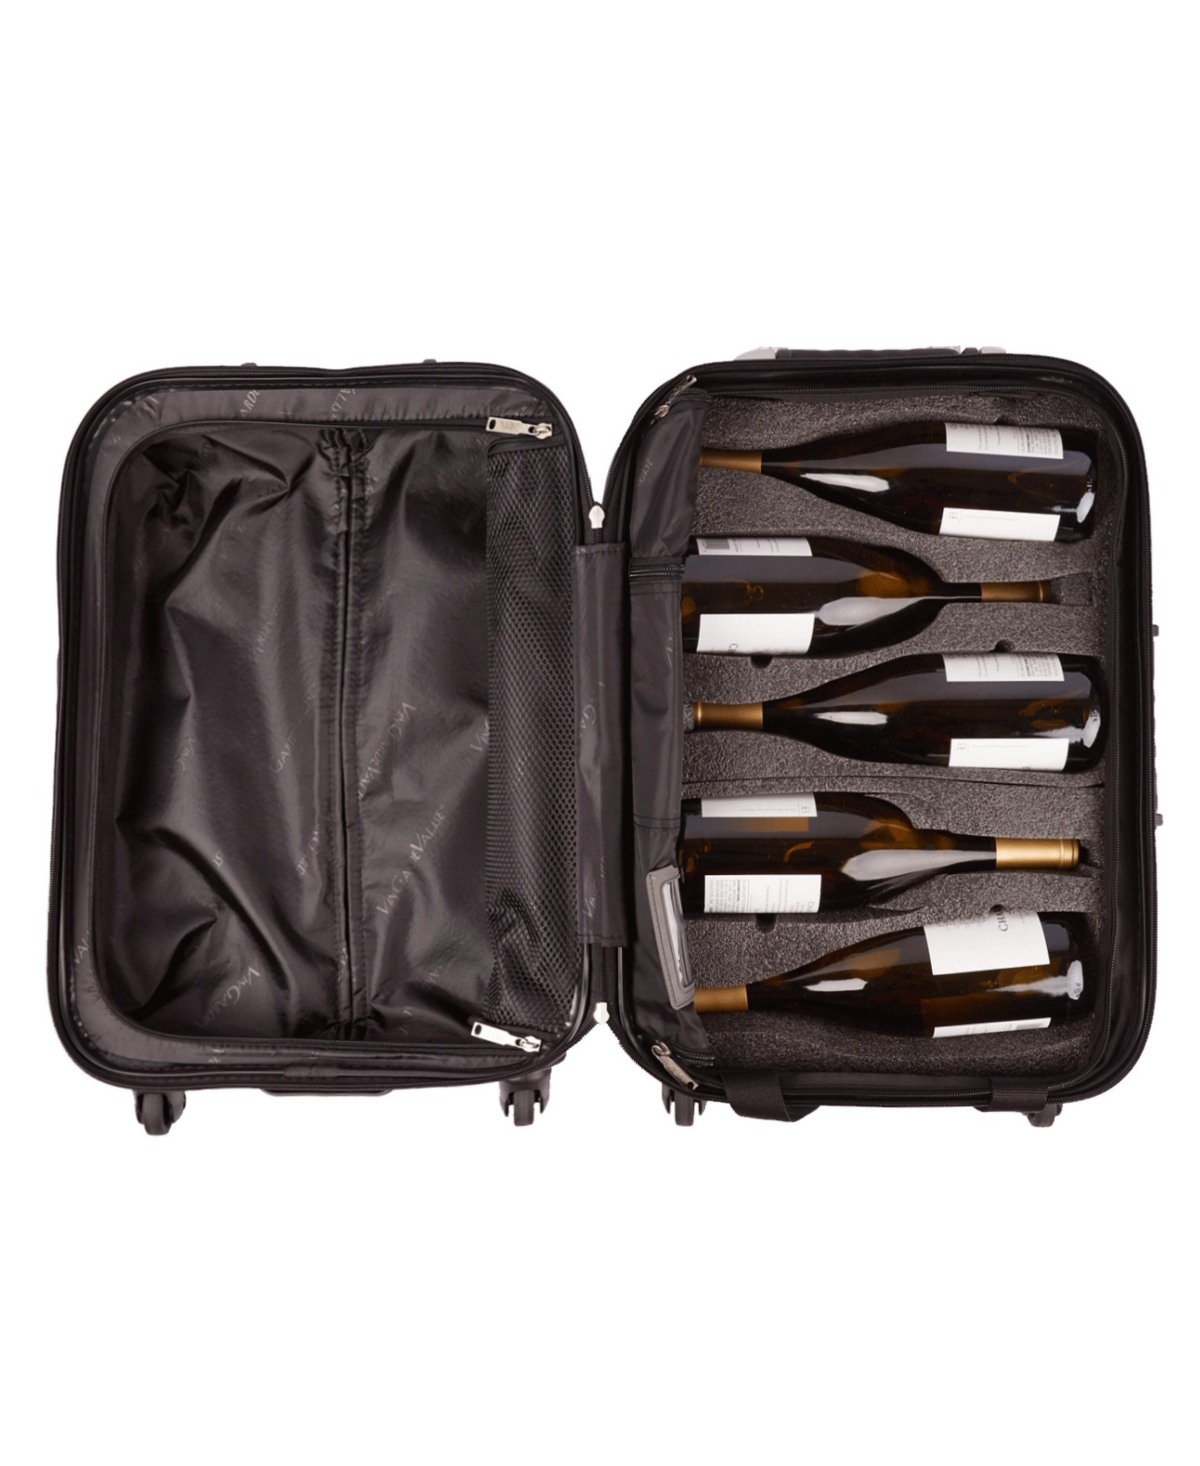 Shop Vingardevalise Piccolo Wine Luggage, 5 Bottles In Silver